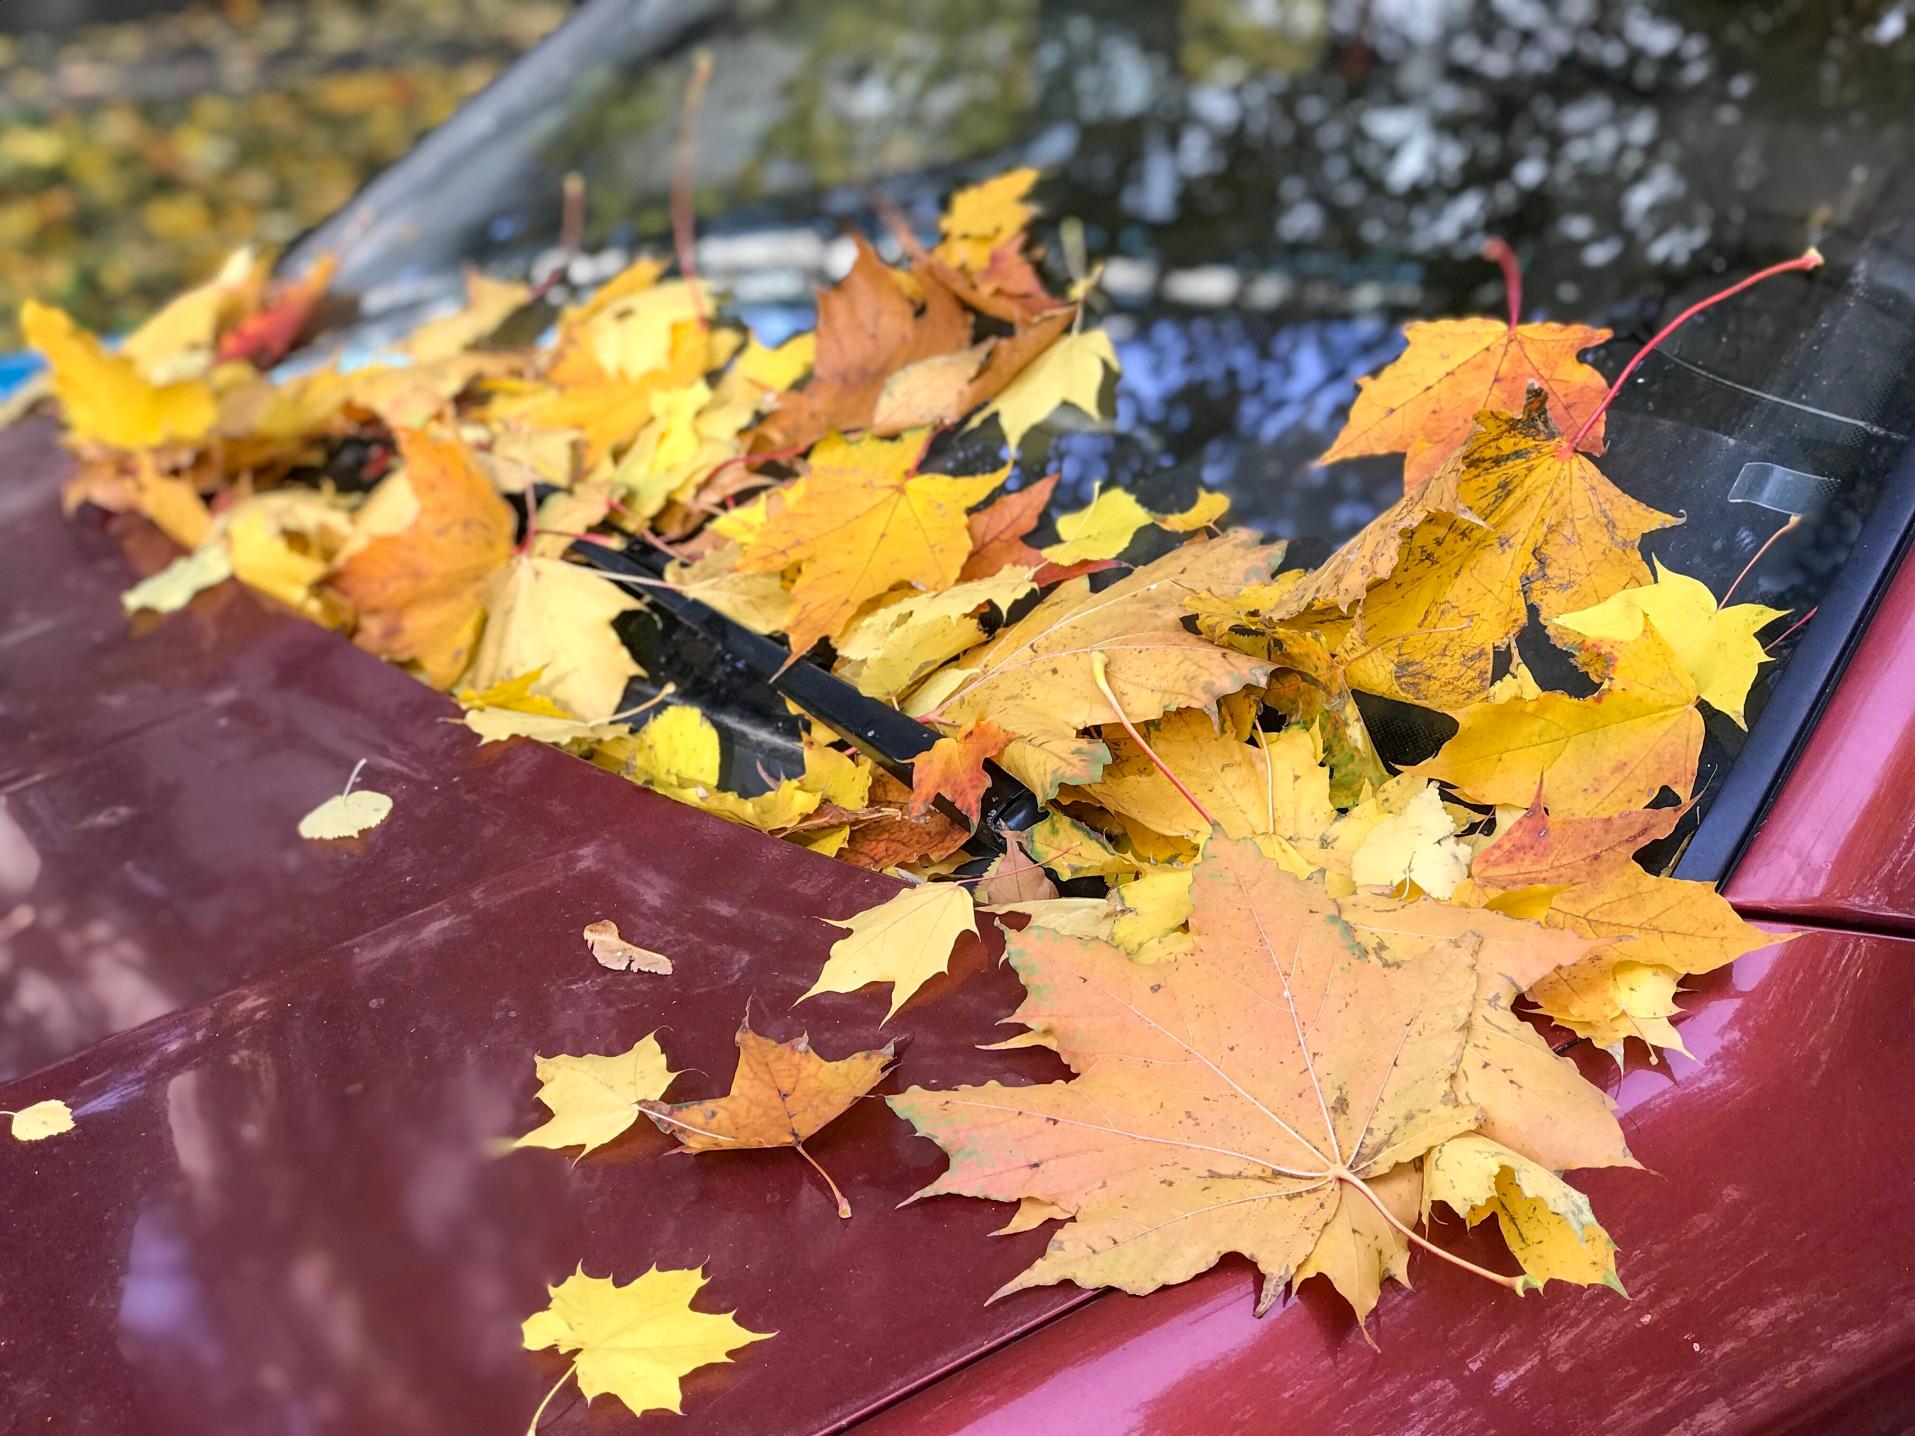 It’s important to remove leaves when they get stuck under your car’s windshield wiper.